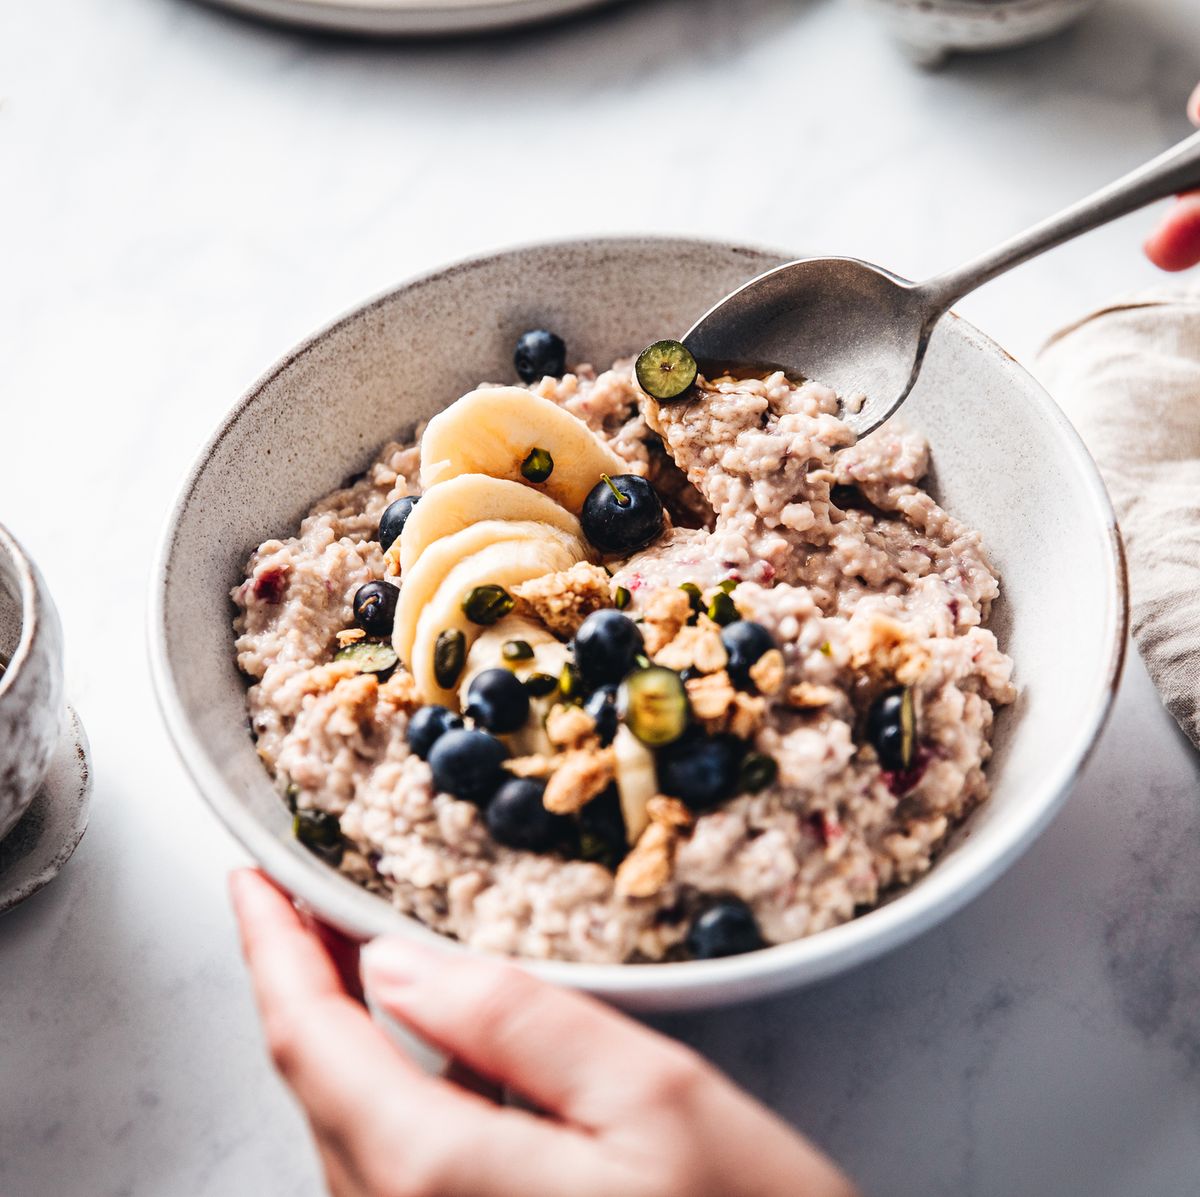 https://hips.hearstapps.com/hmg-prod/images/woman-making-healthy-breakfast-in-kitchen-royalty-free-image-1641491964.jpg?crop=0.668xw:1.00xh;0.213xw,0&resize=1200:*